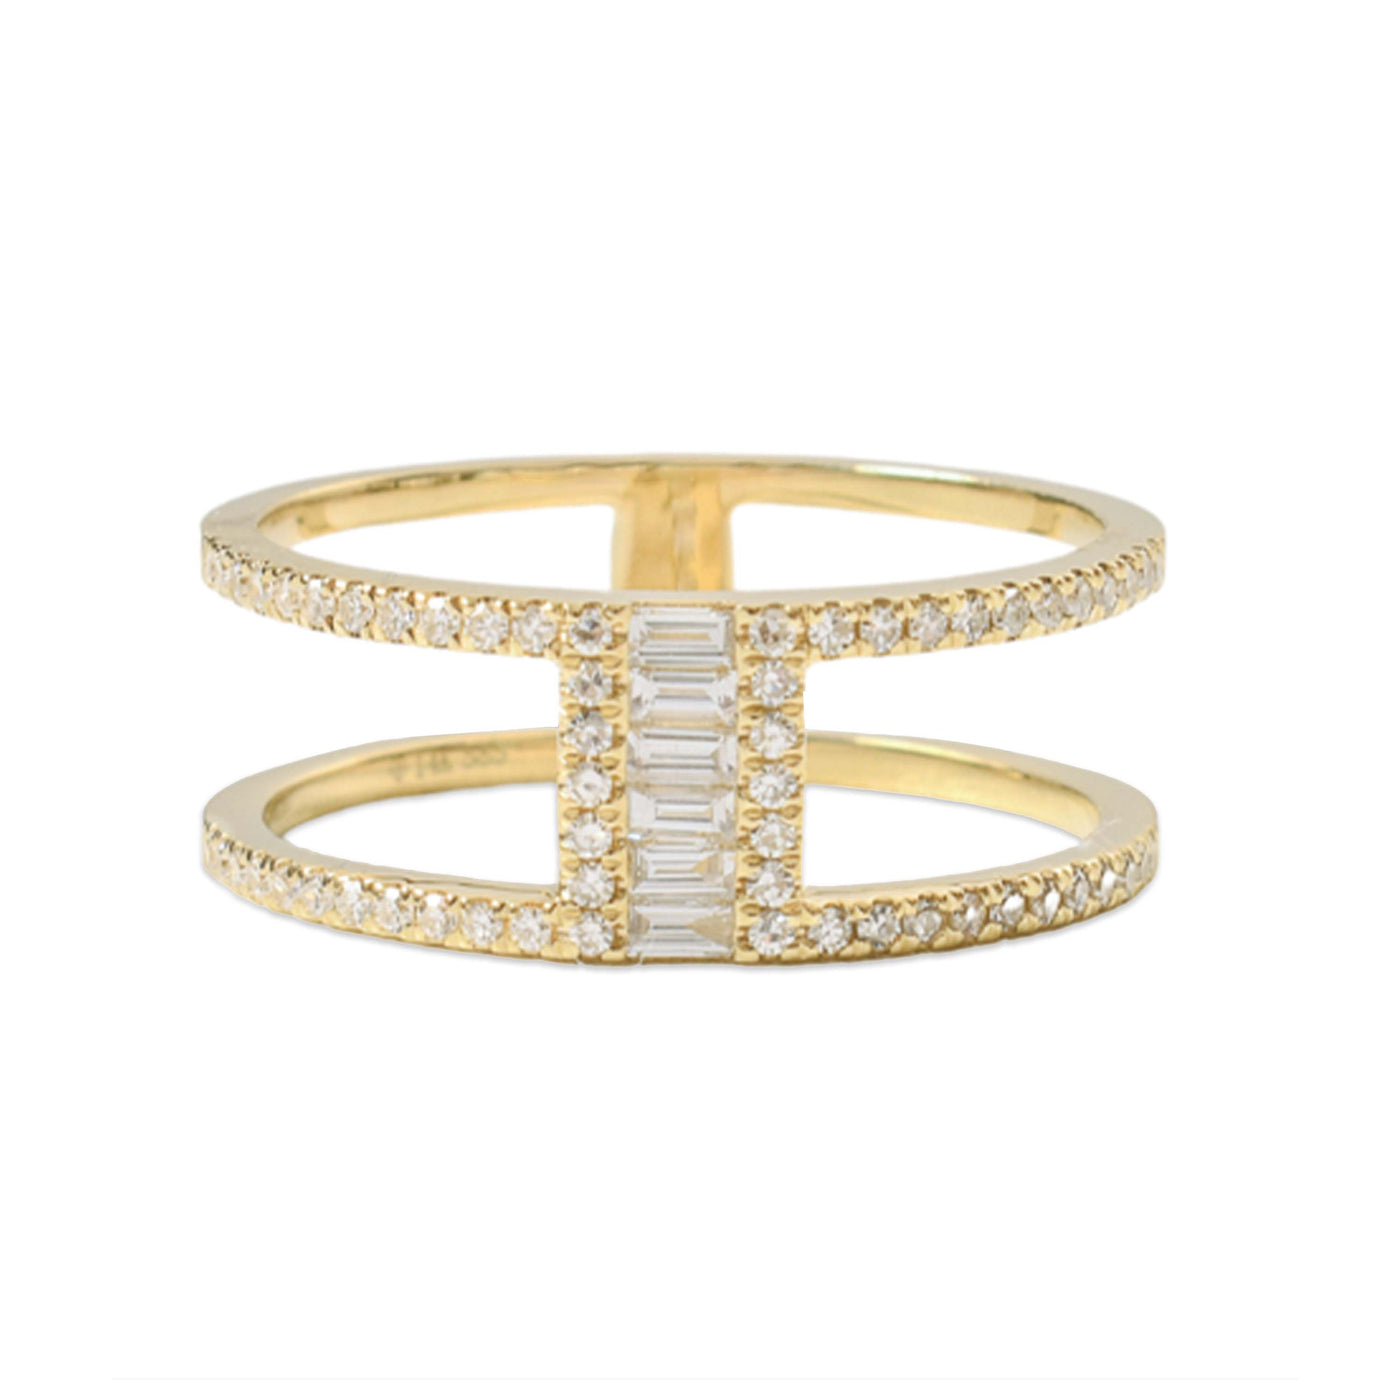 Double Band with Baguette Center Ring